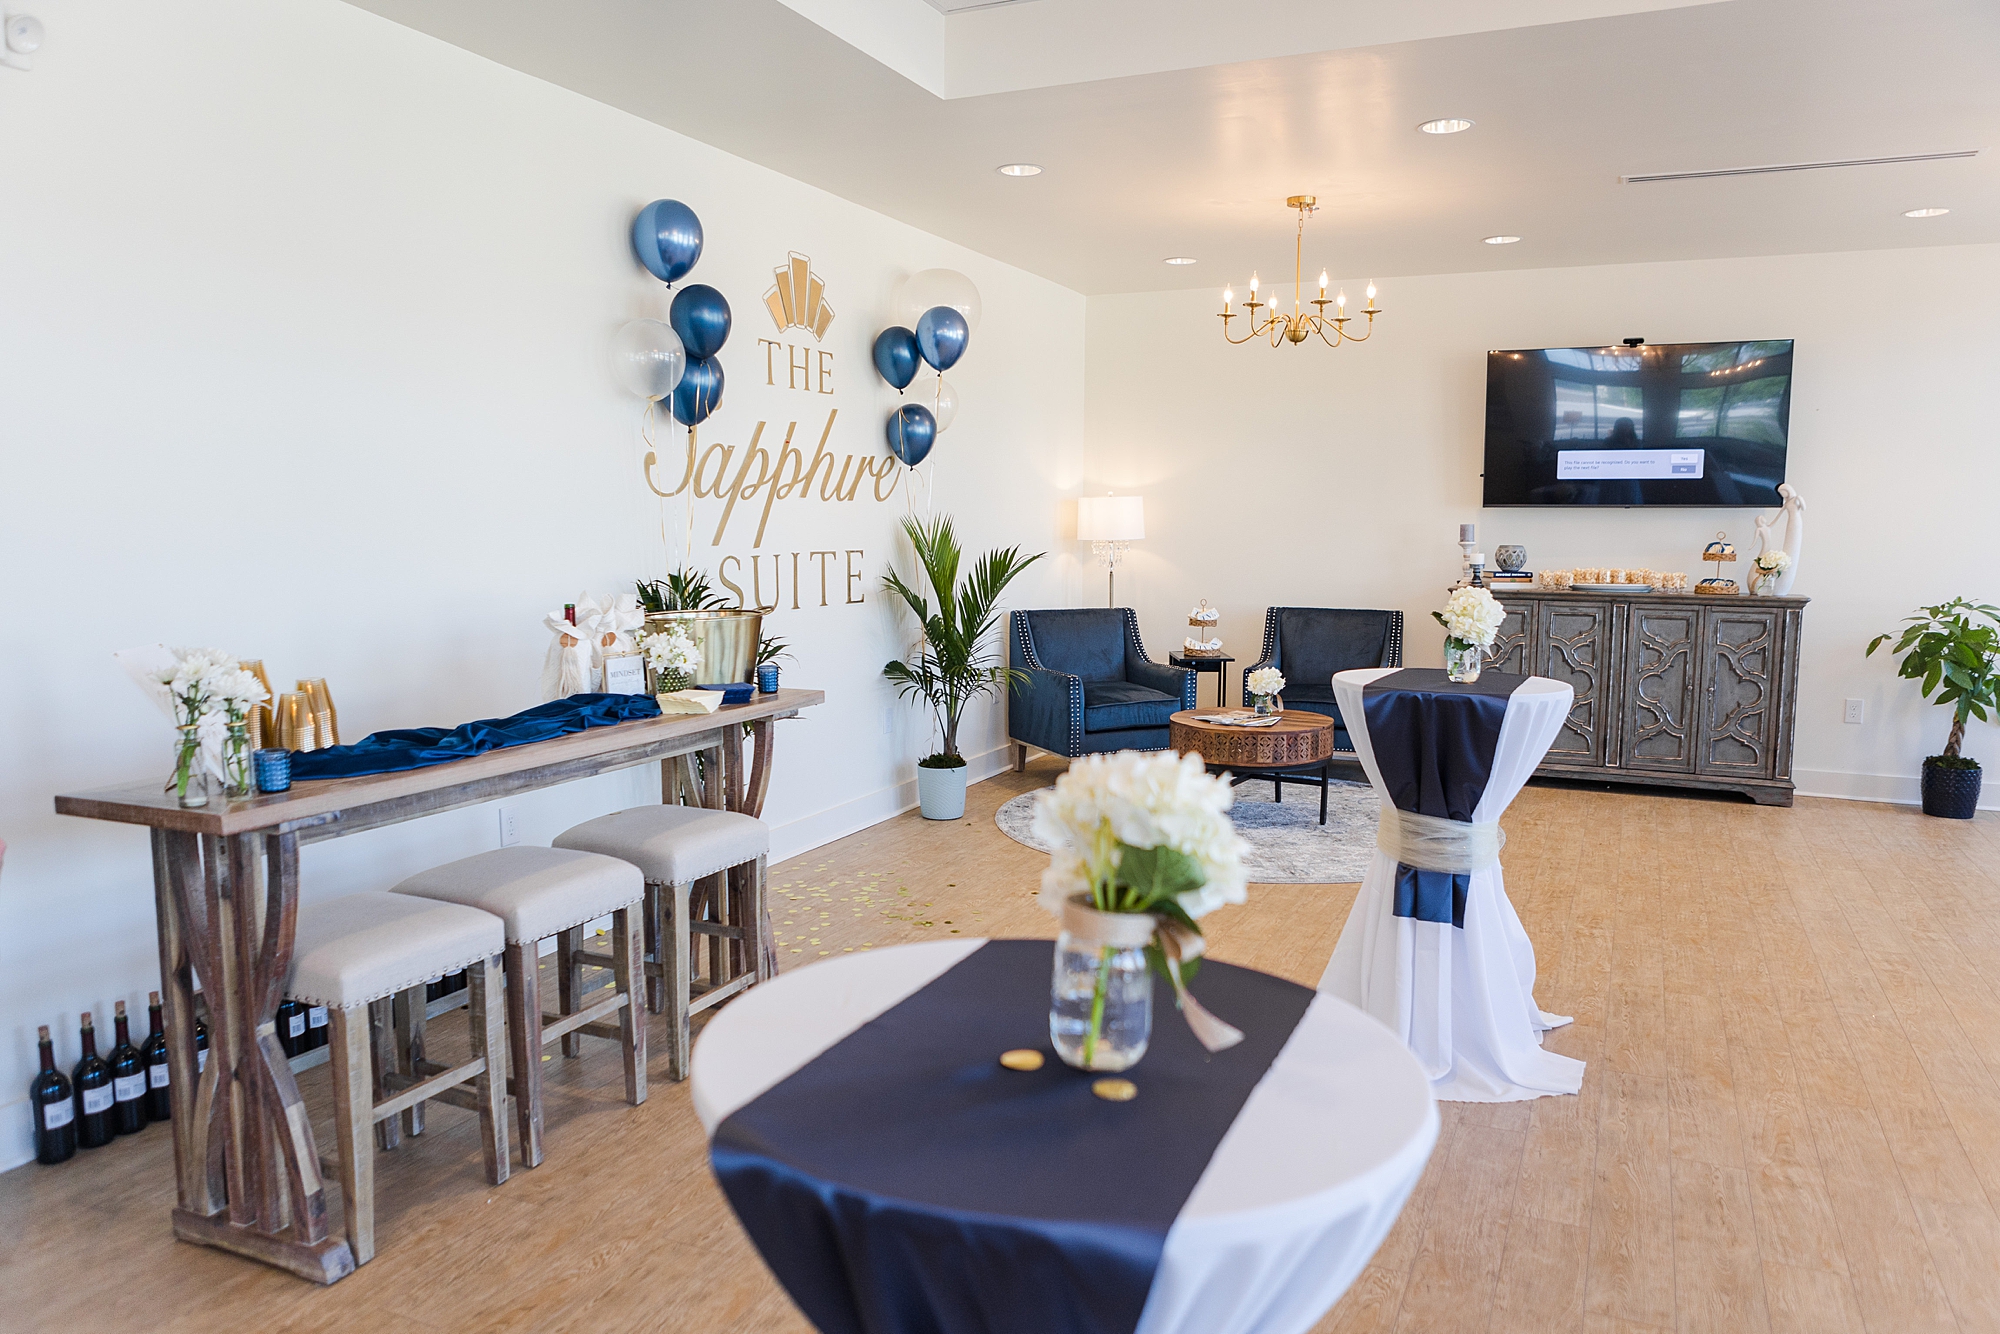 opening day party at The Sapphire Suite